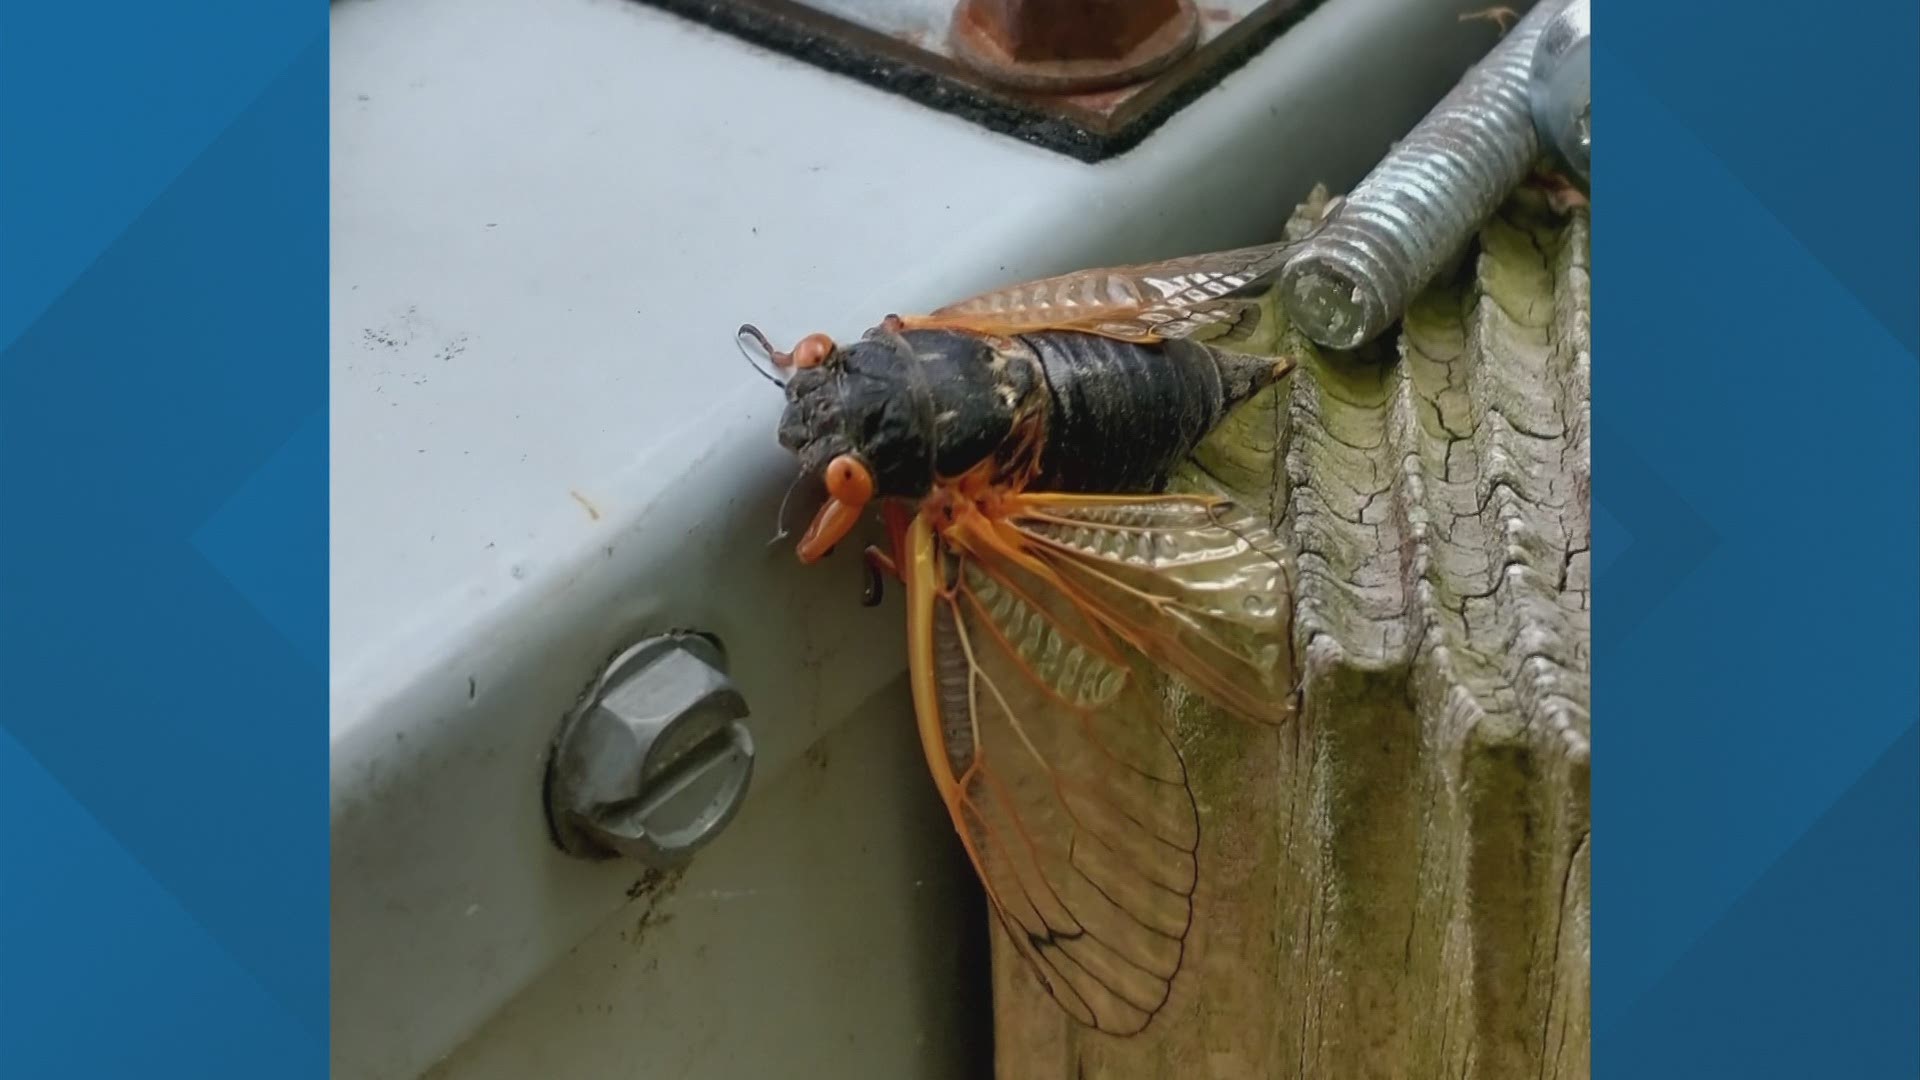 The Brood X cicadas are a type of periodical cicadas that will emerge every 17 years, but why?